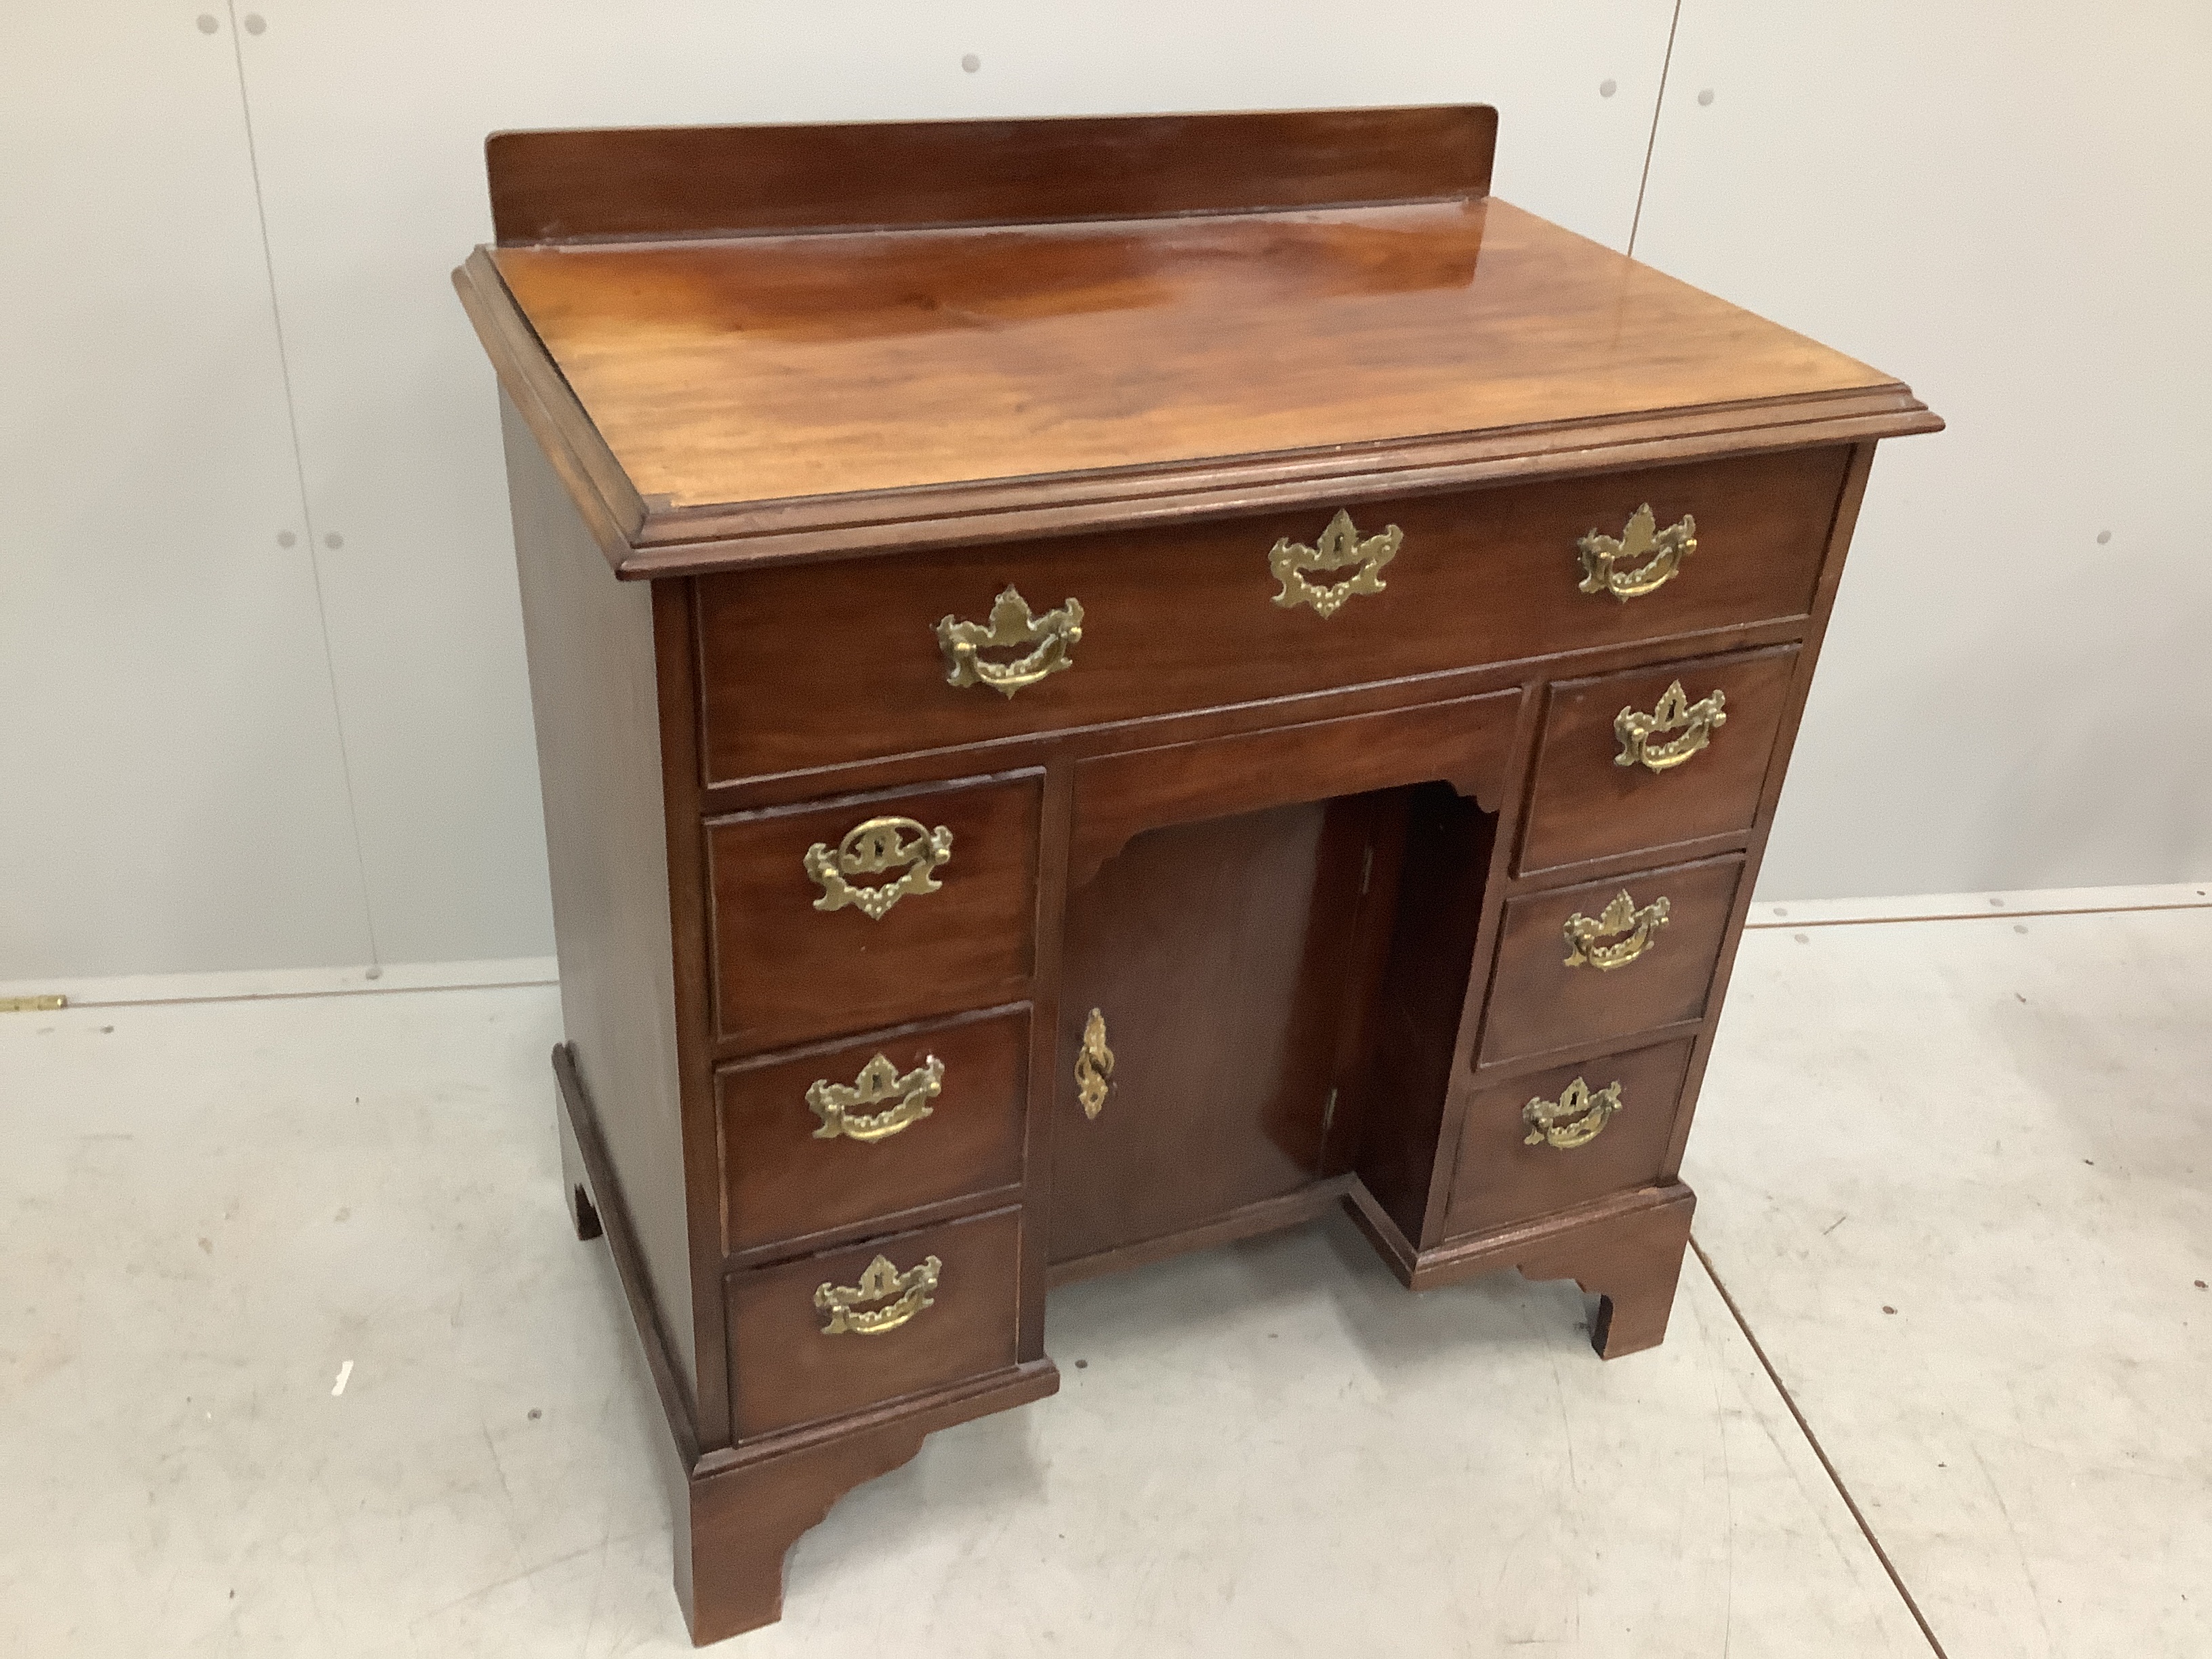 A George III and later mahogany kneehole desk with secretaire drawer, width 85cm, depth 52cm, height 92cm